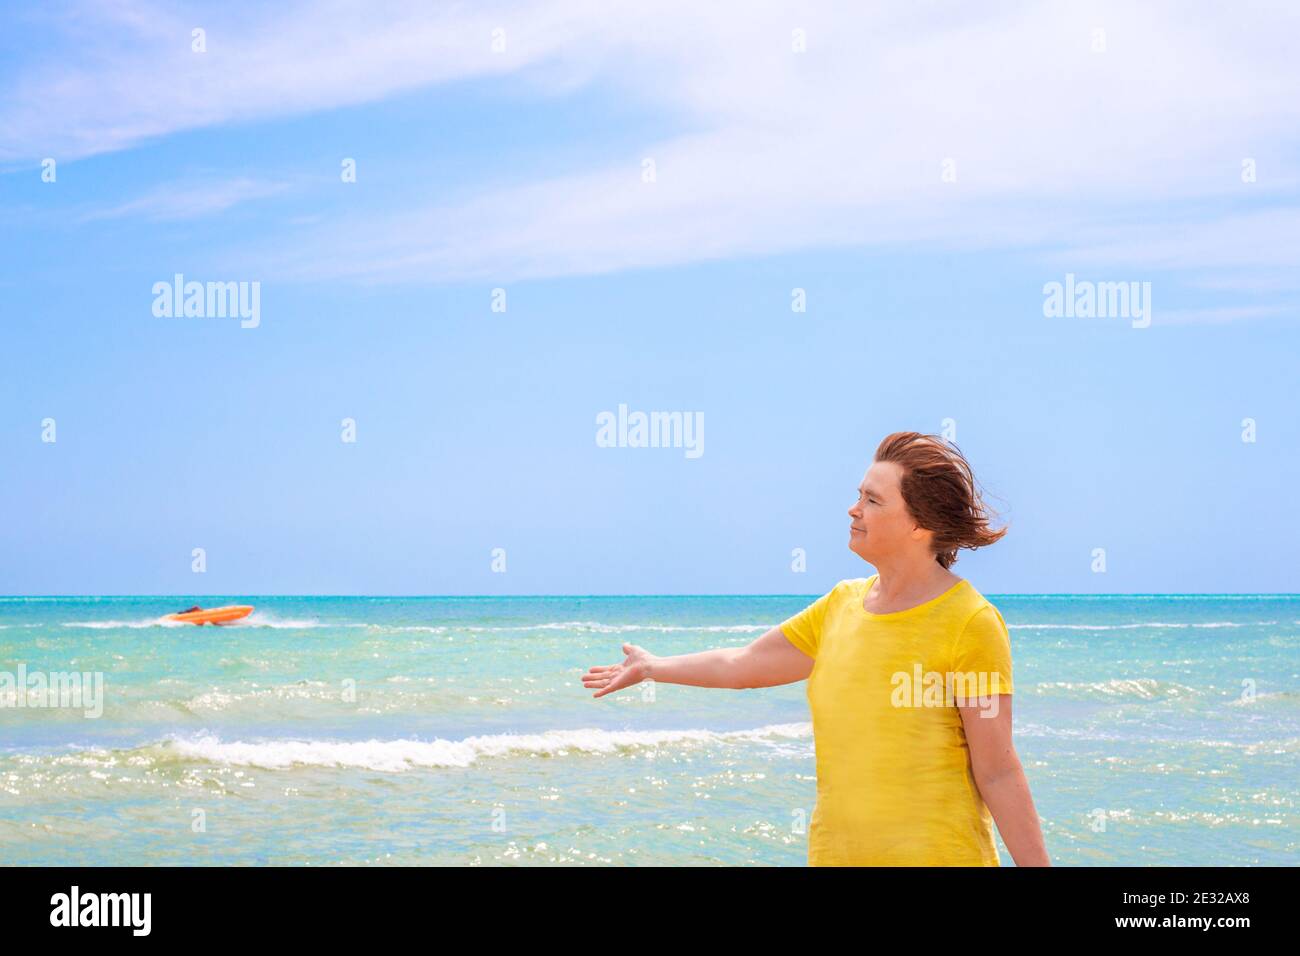 an elderly woman on the shores of the azure sea against a blue sky, stretching out her hand to the side, and enjoys a summer day, the end of quarantin Stock Photo